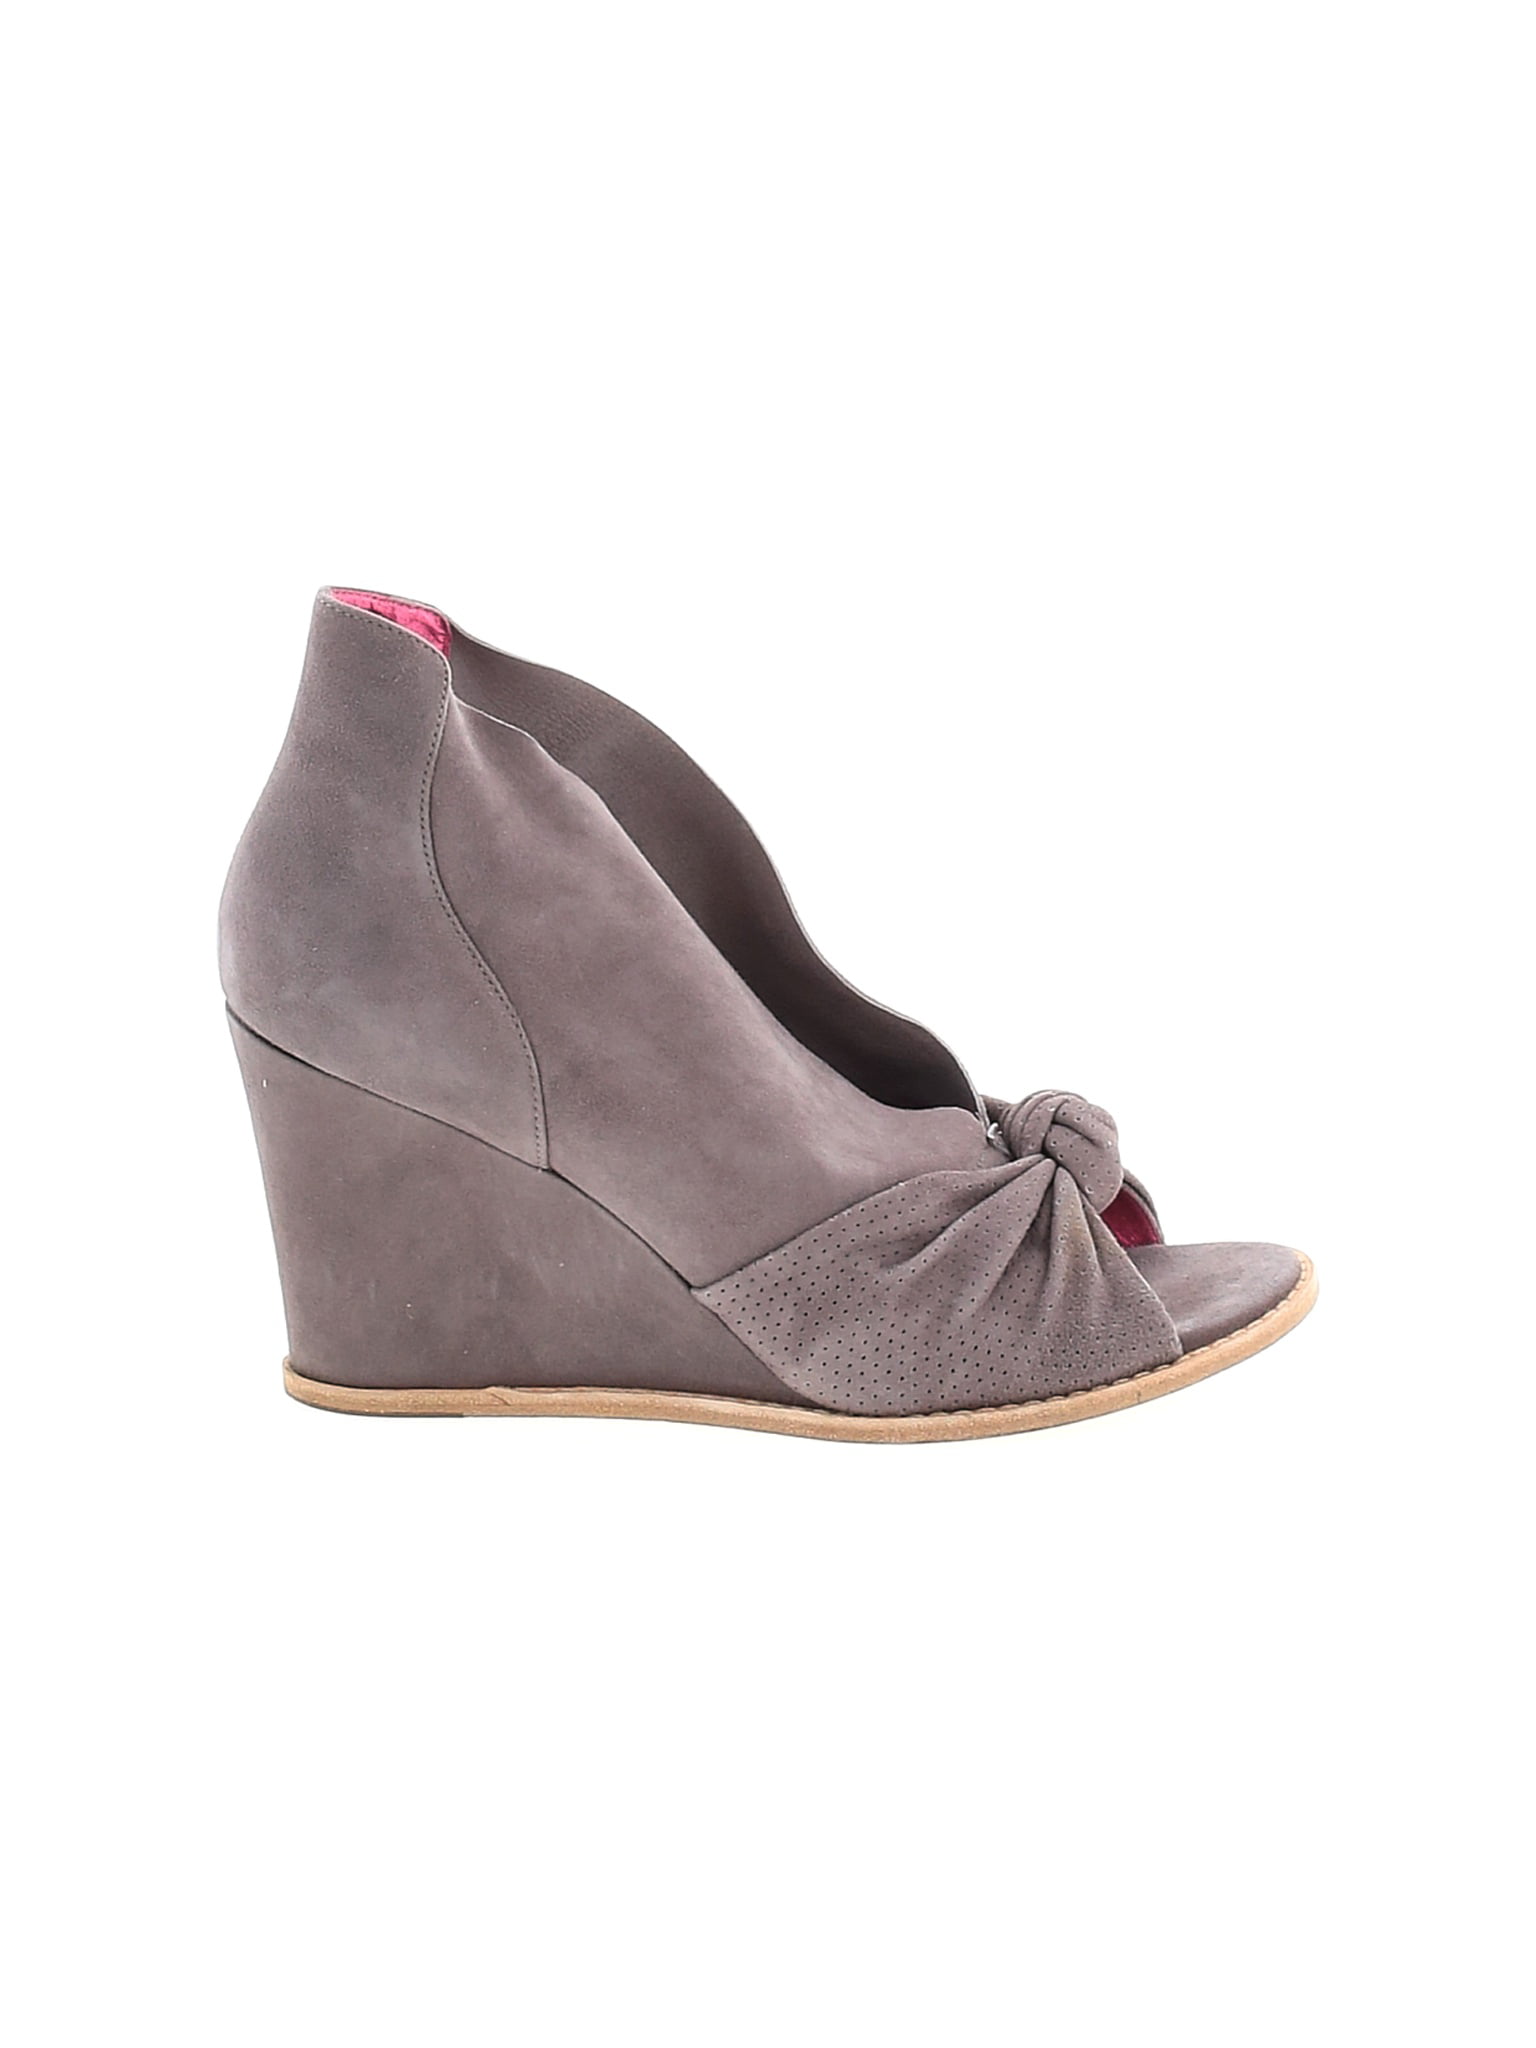 belle by sigerson morrison wedges